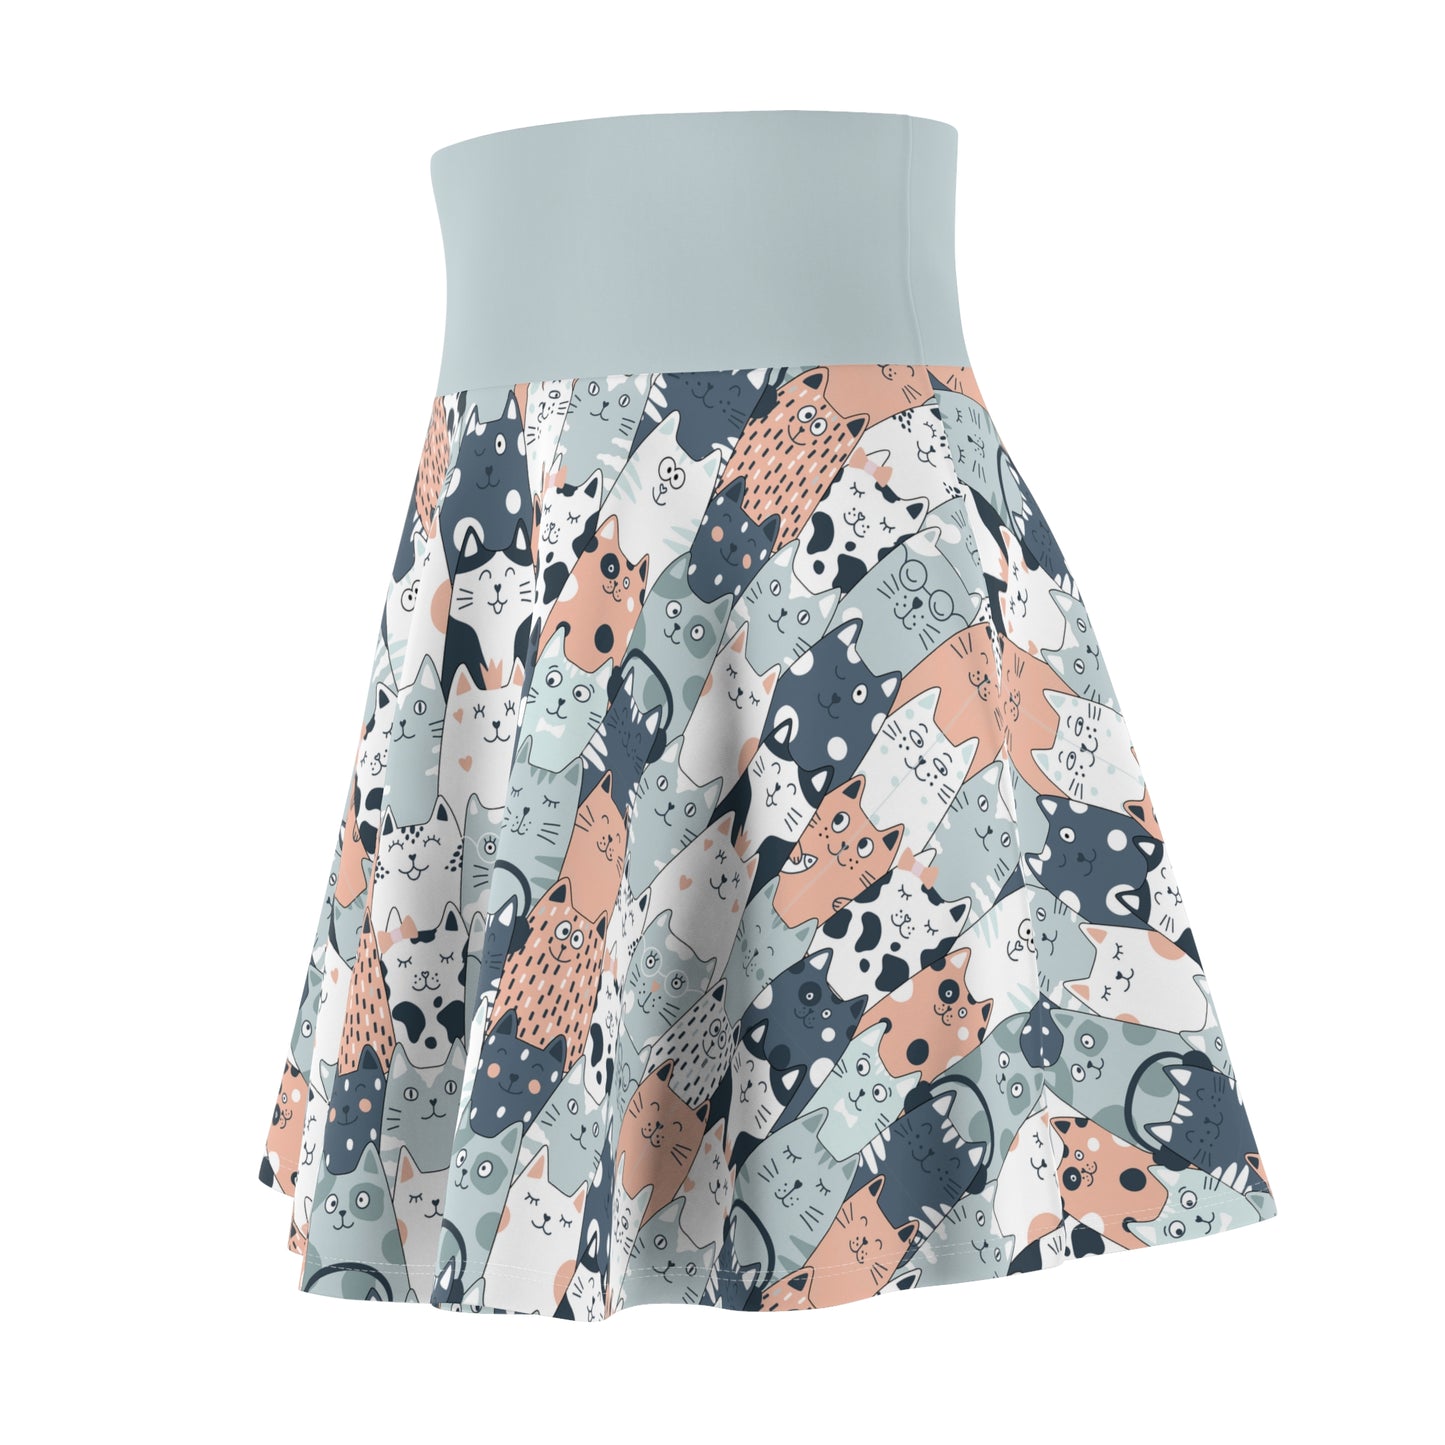 More Meow - Skater Skirts For You